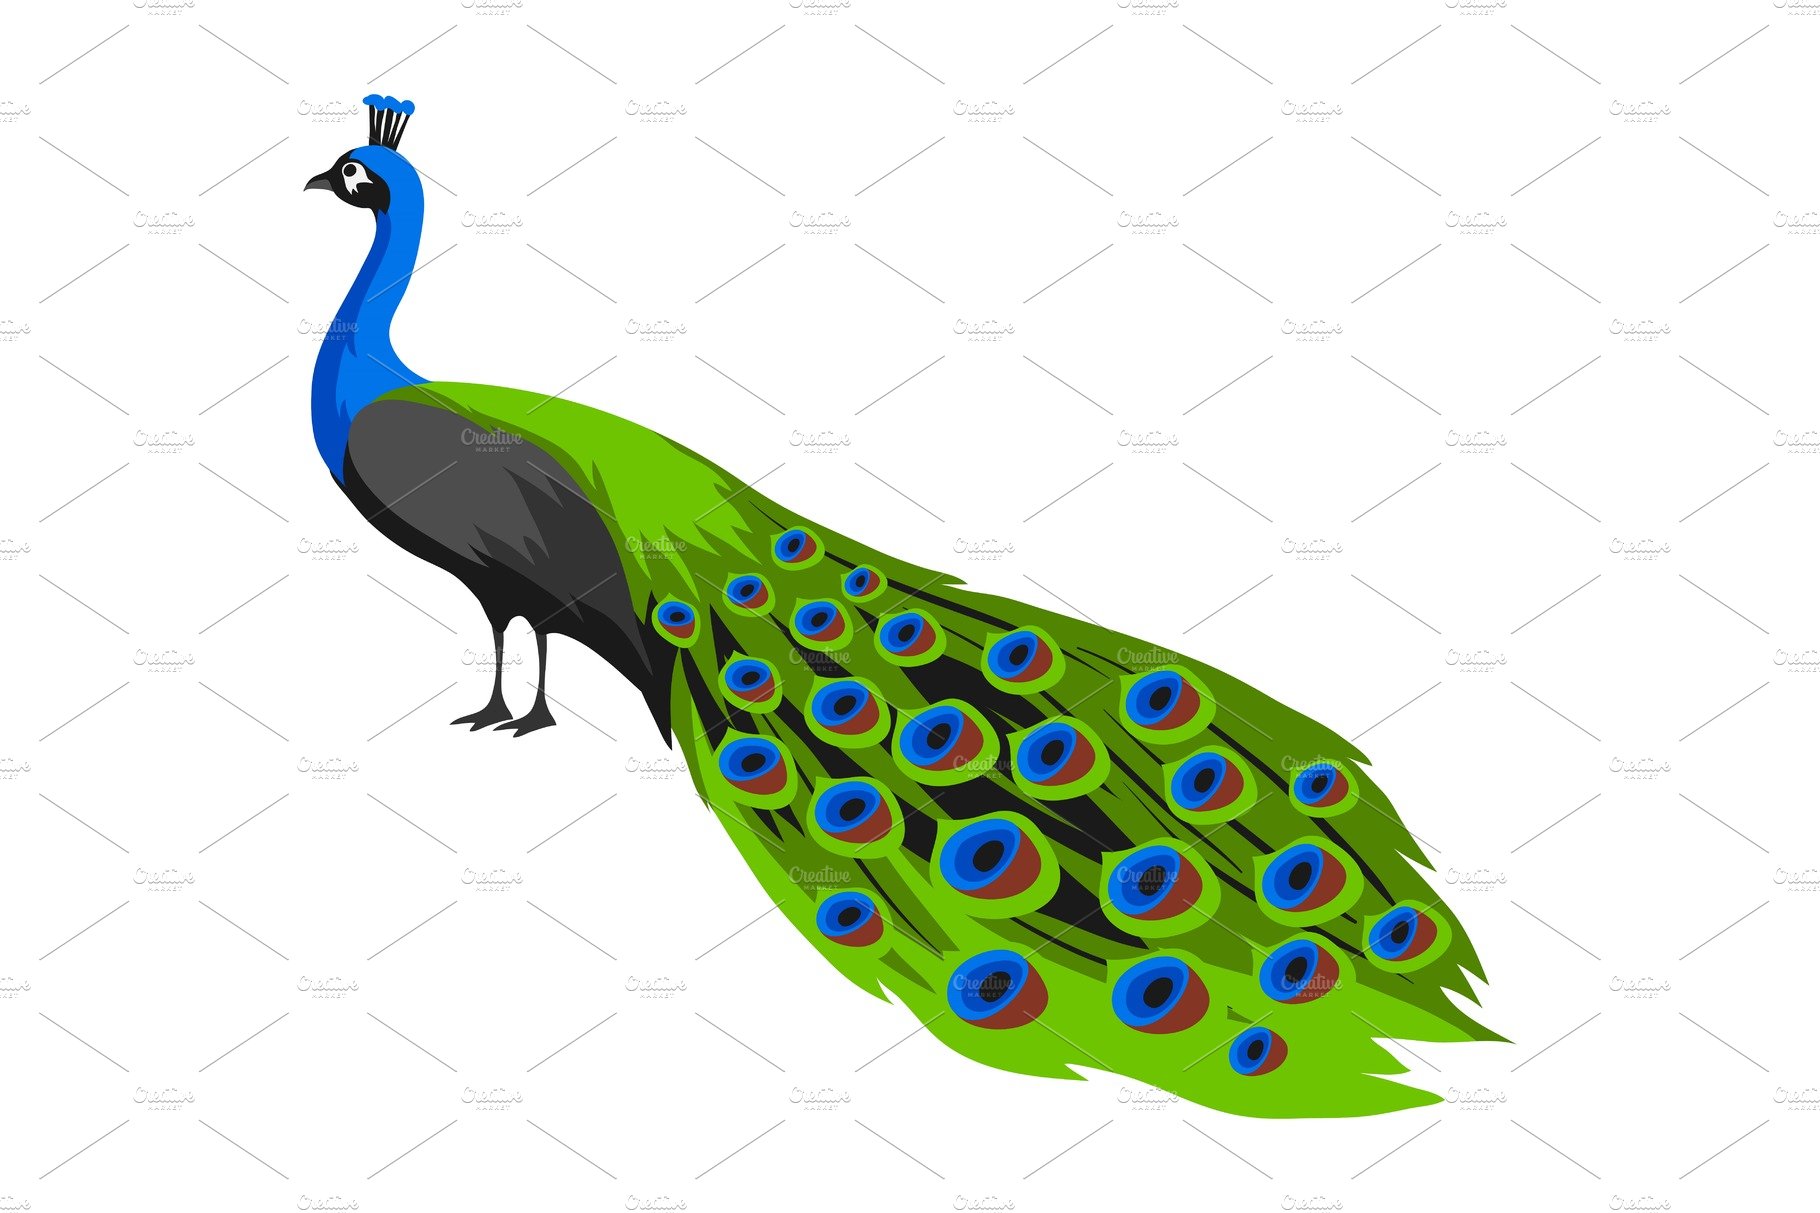 Illustration of peacock. Tropical cover image.